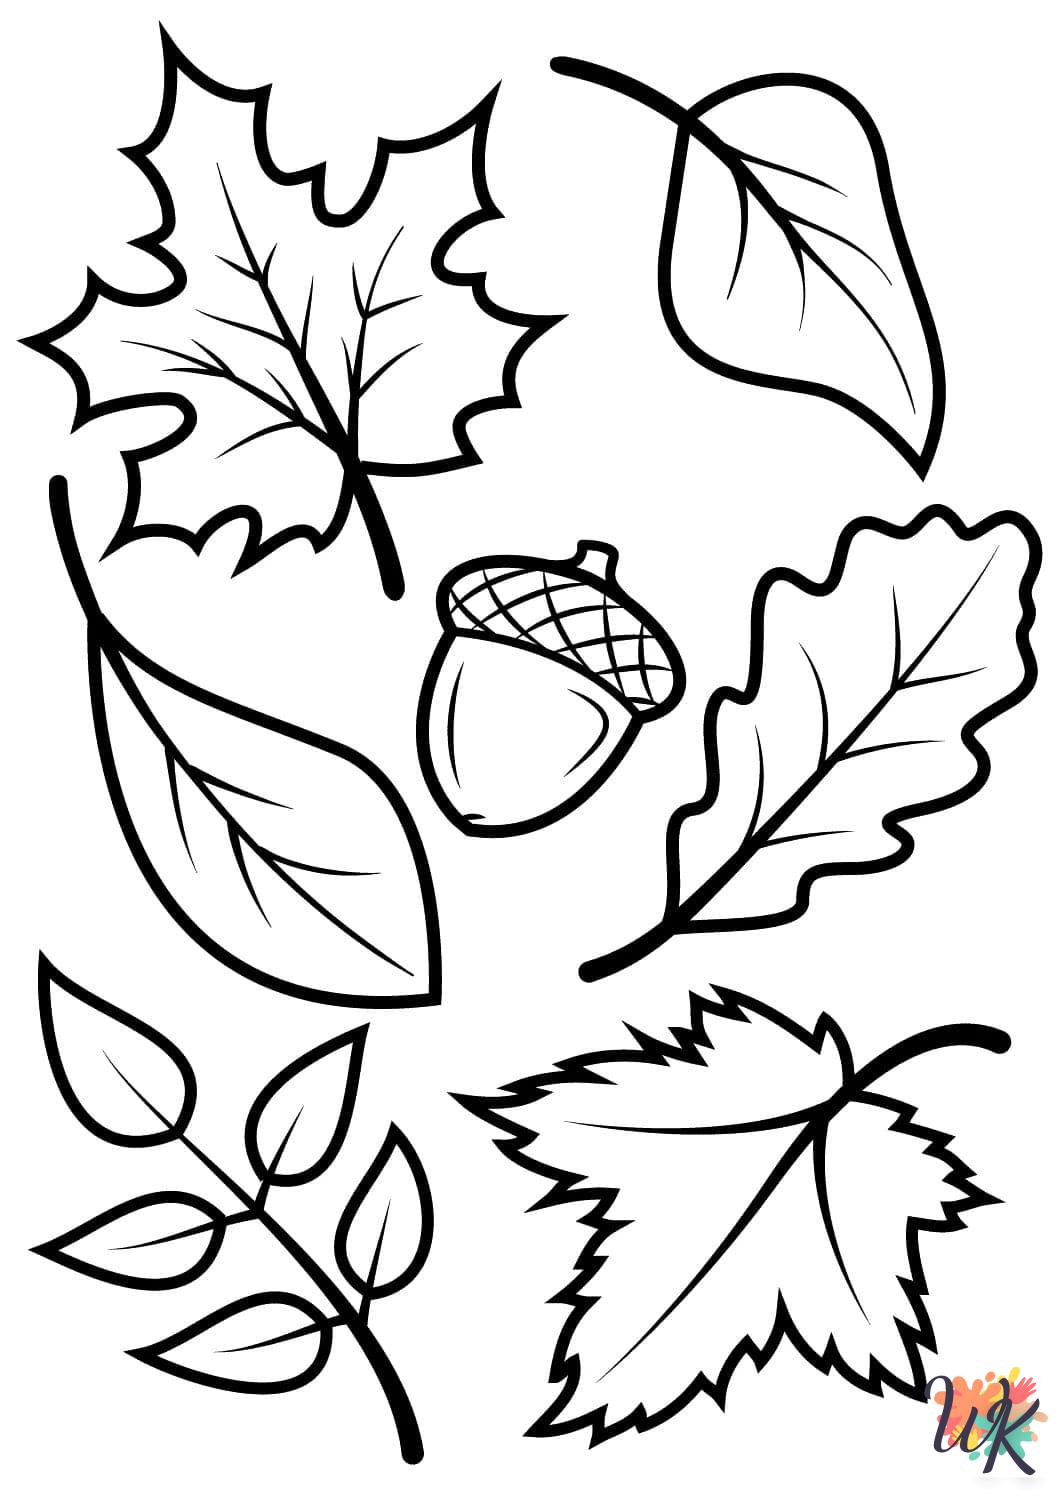 Fall Leaves coloring book pages